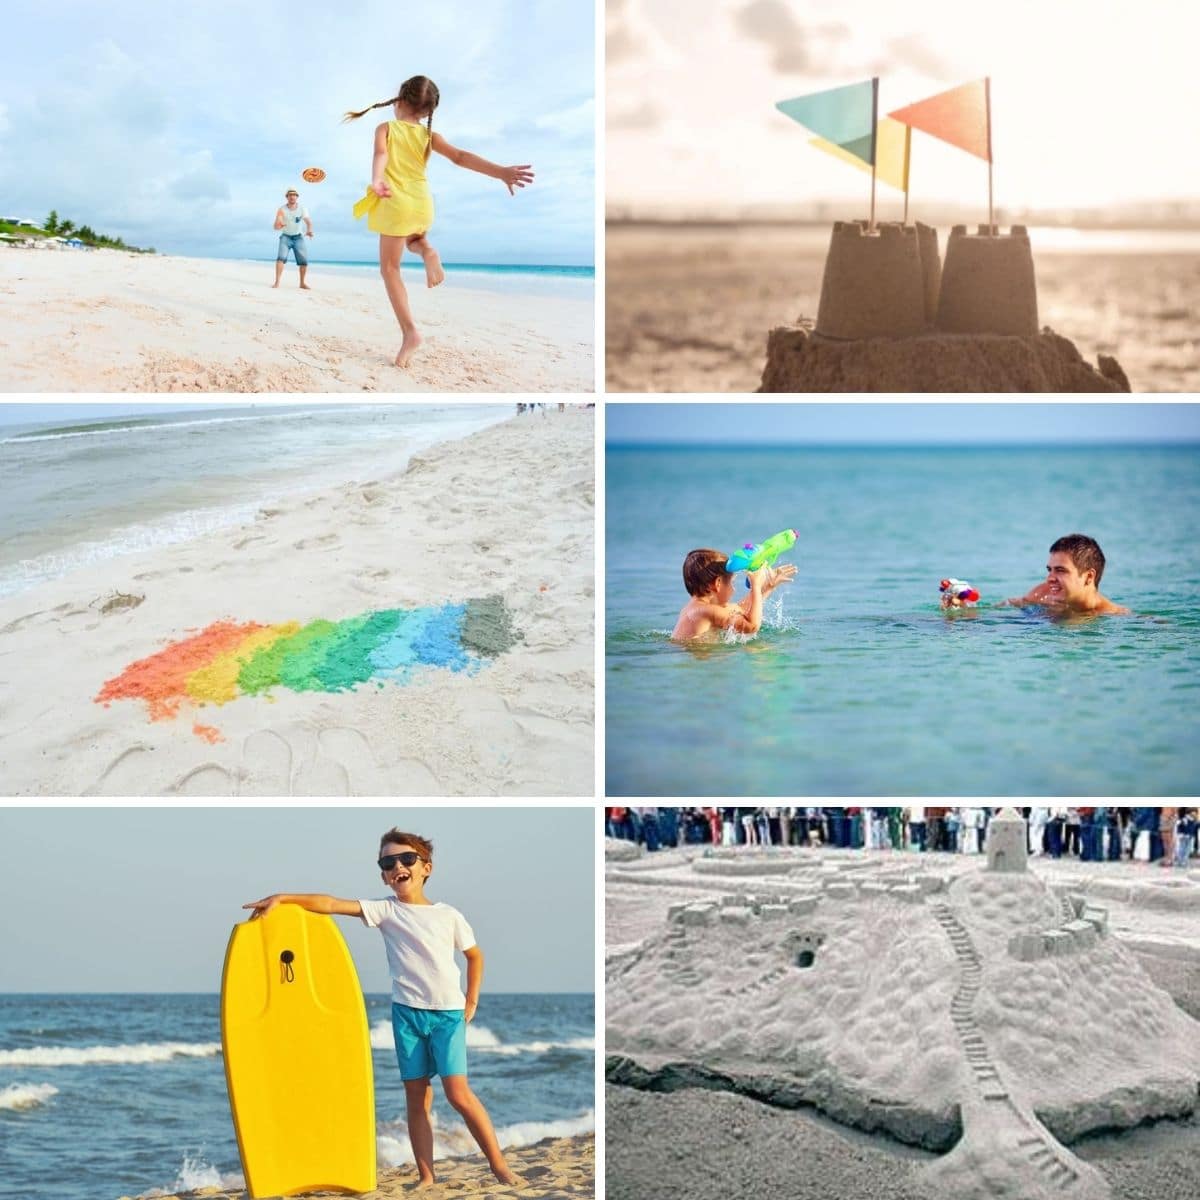 Collage of images of beach activities and games for endless fun